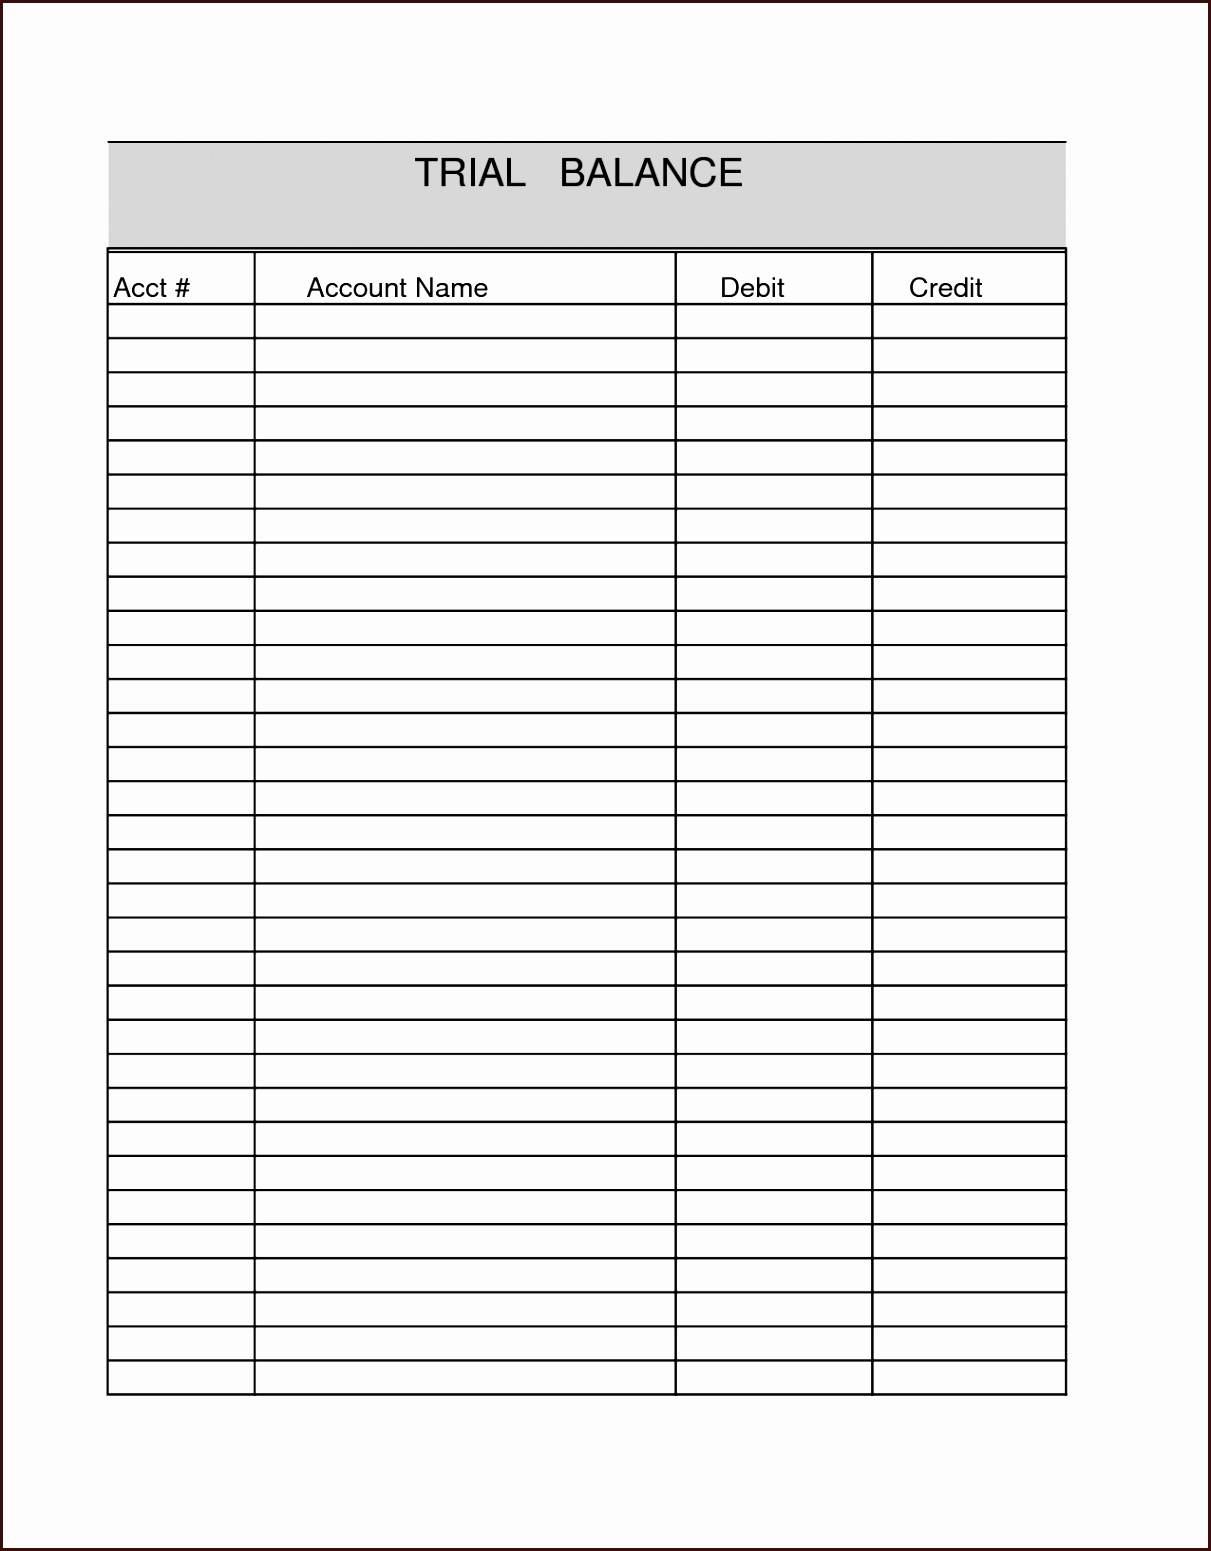 Accounting Balance Sheet Template Excel Blank Accounting Trial Throughout Blank Trial Balance Sheet